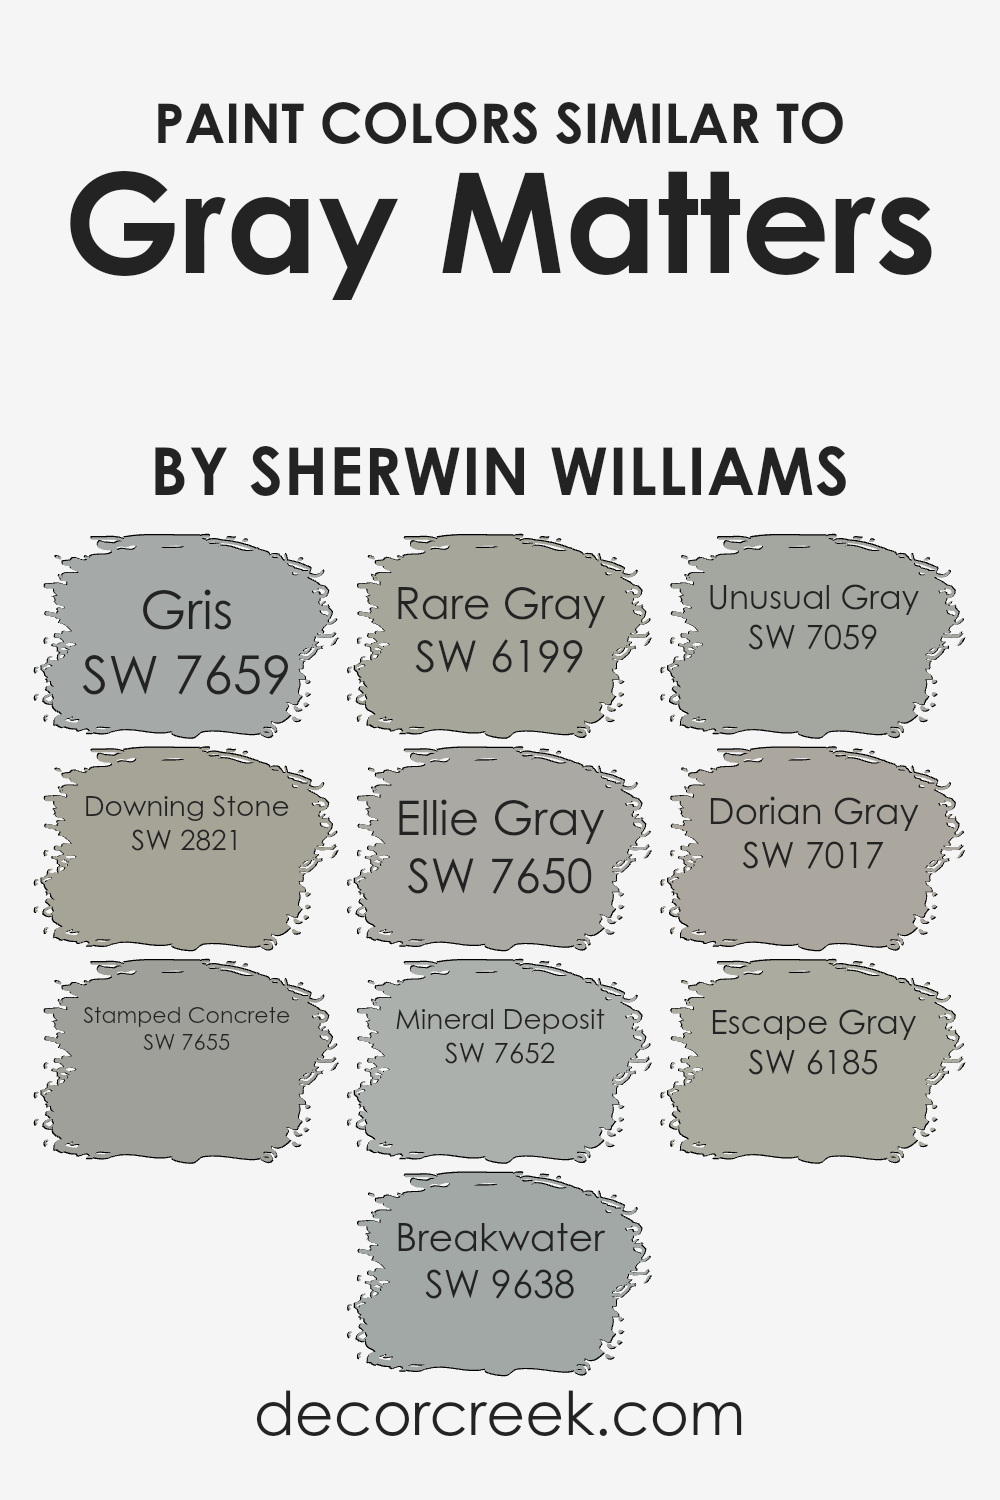 colors_similar_to_gray_matters_sw_7066